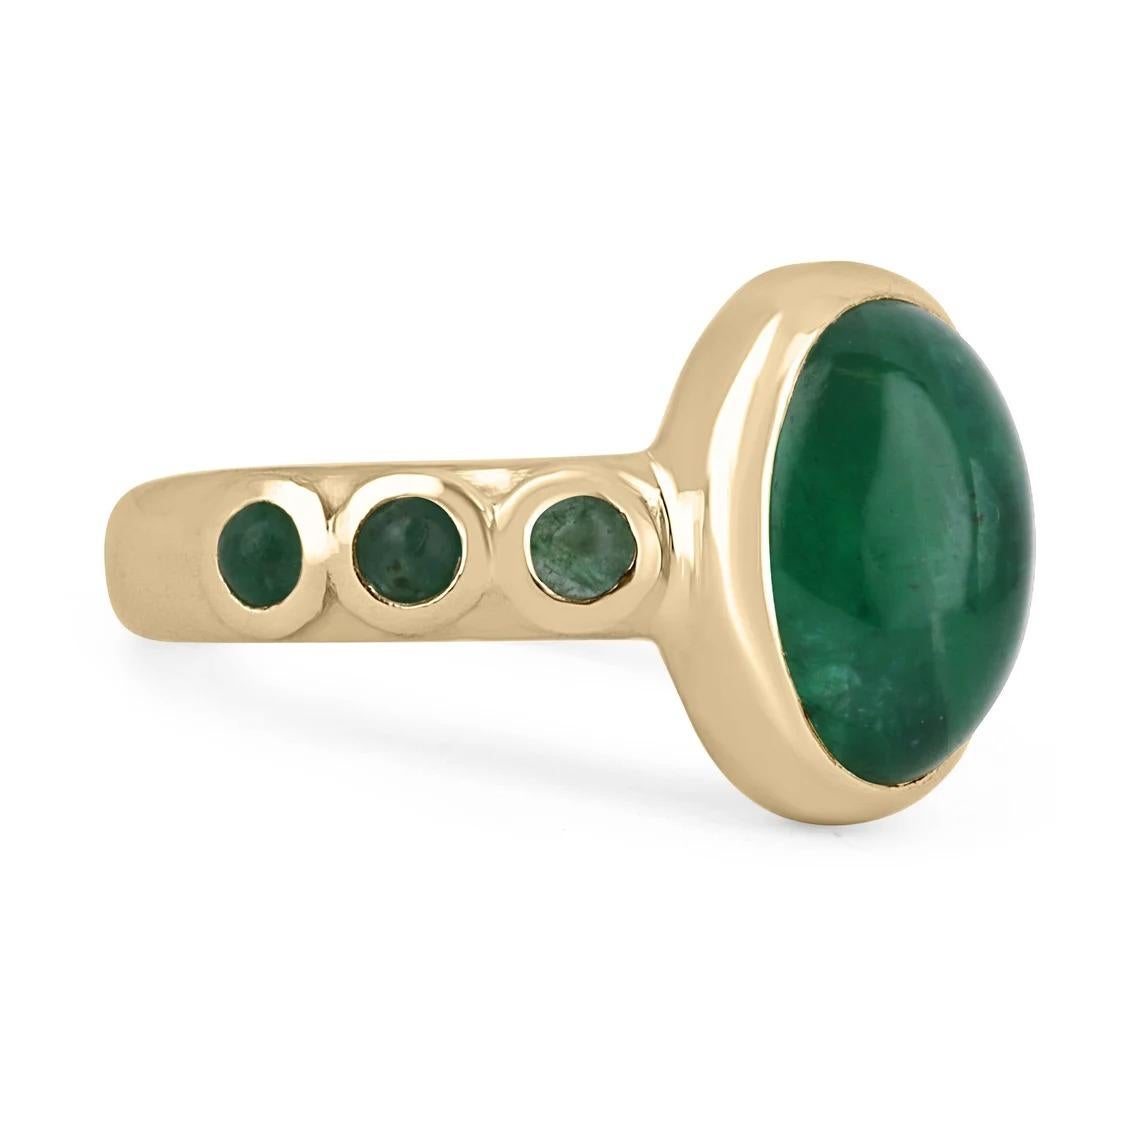 Featured is a stunning natural emerald cabochon unisex ring. This one-of-a-kind piece features a large 4.54-carat oval cut emerald cabochon as the center stone. It displays many good qualities and a lush medium-dark green color. Accenting the center